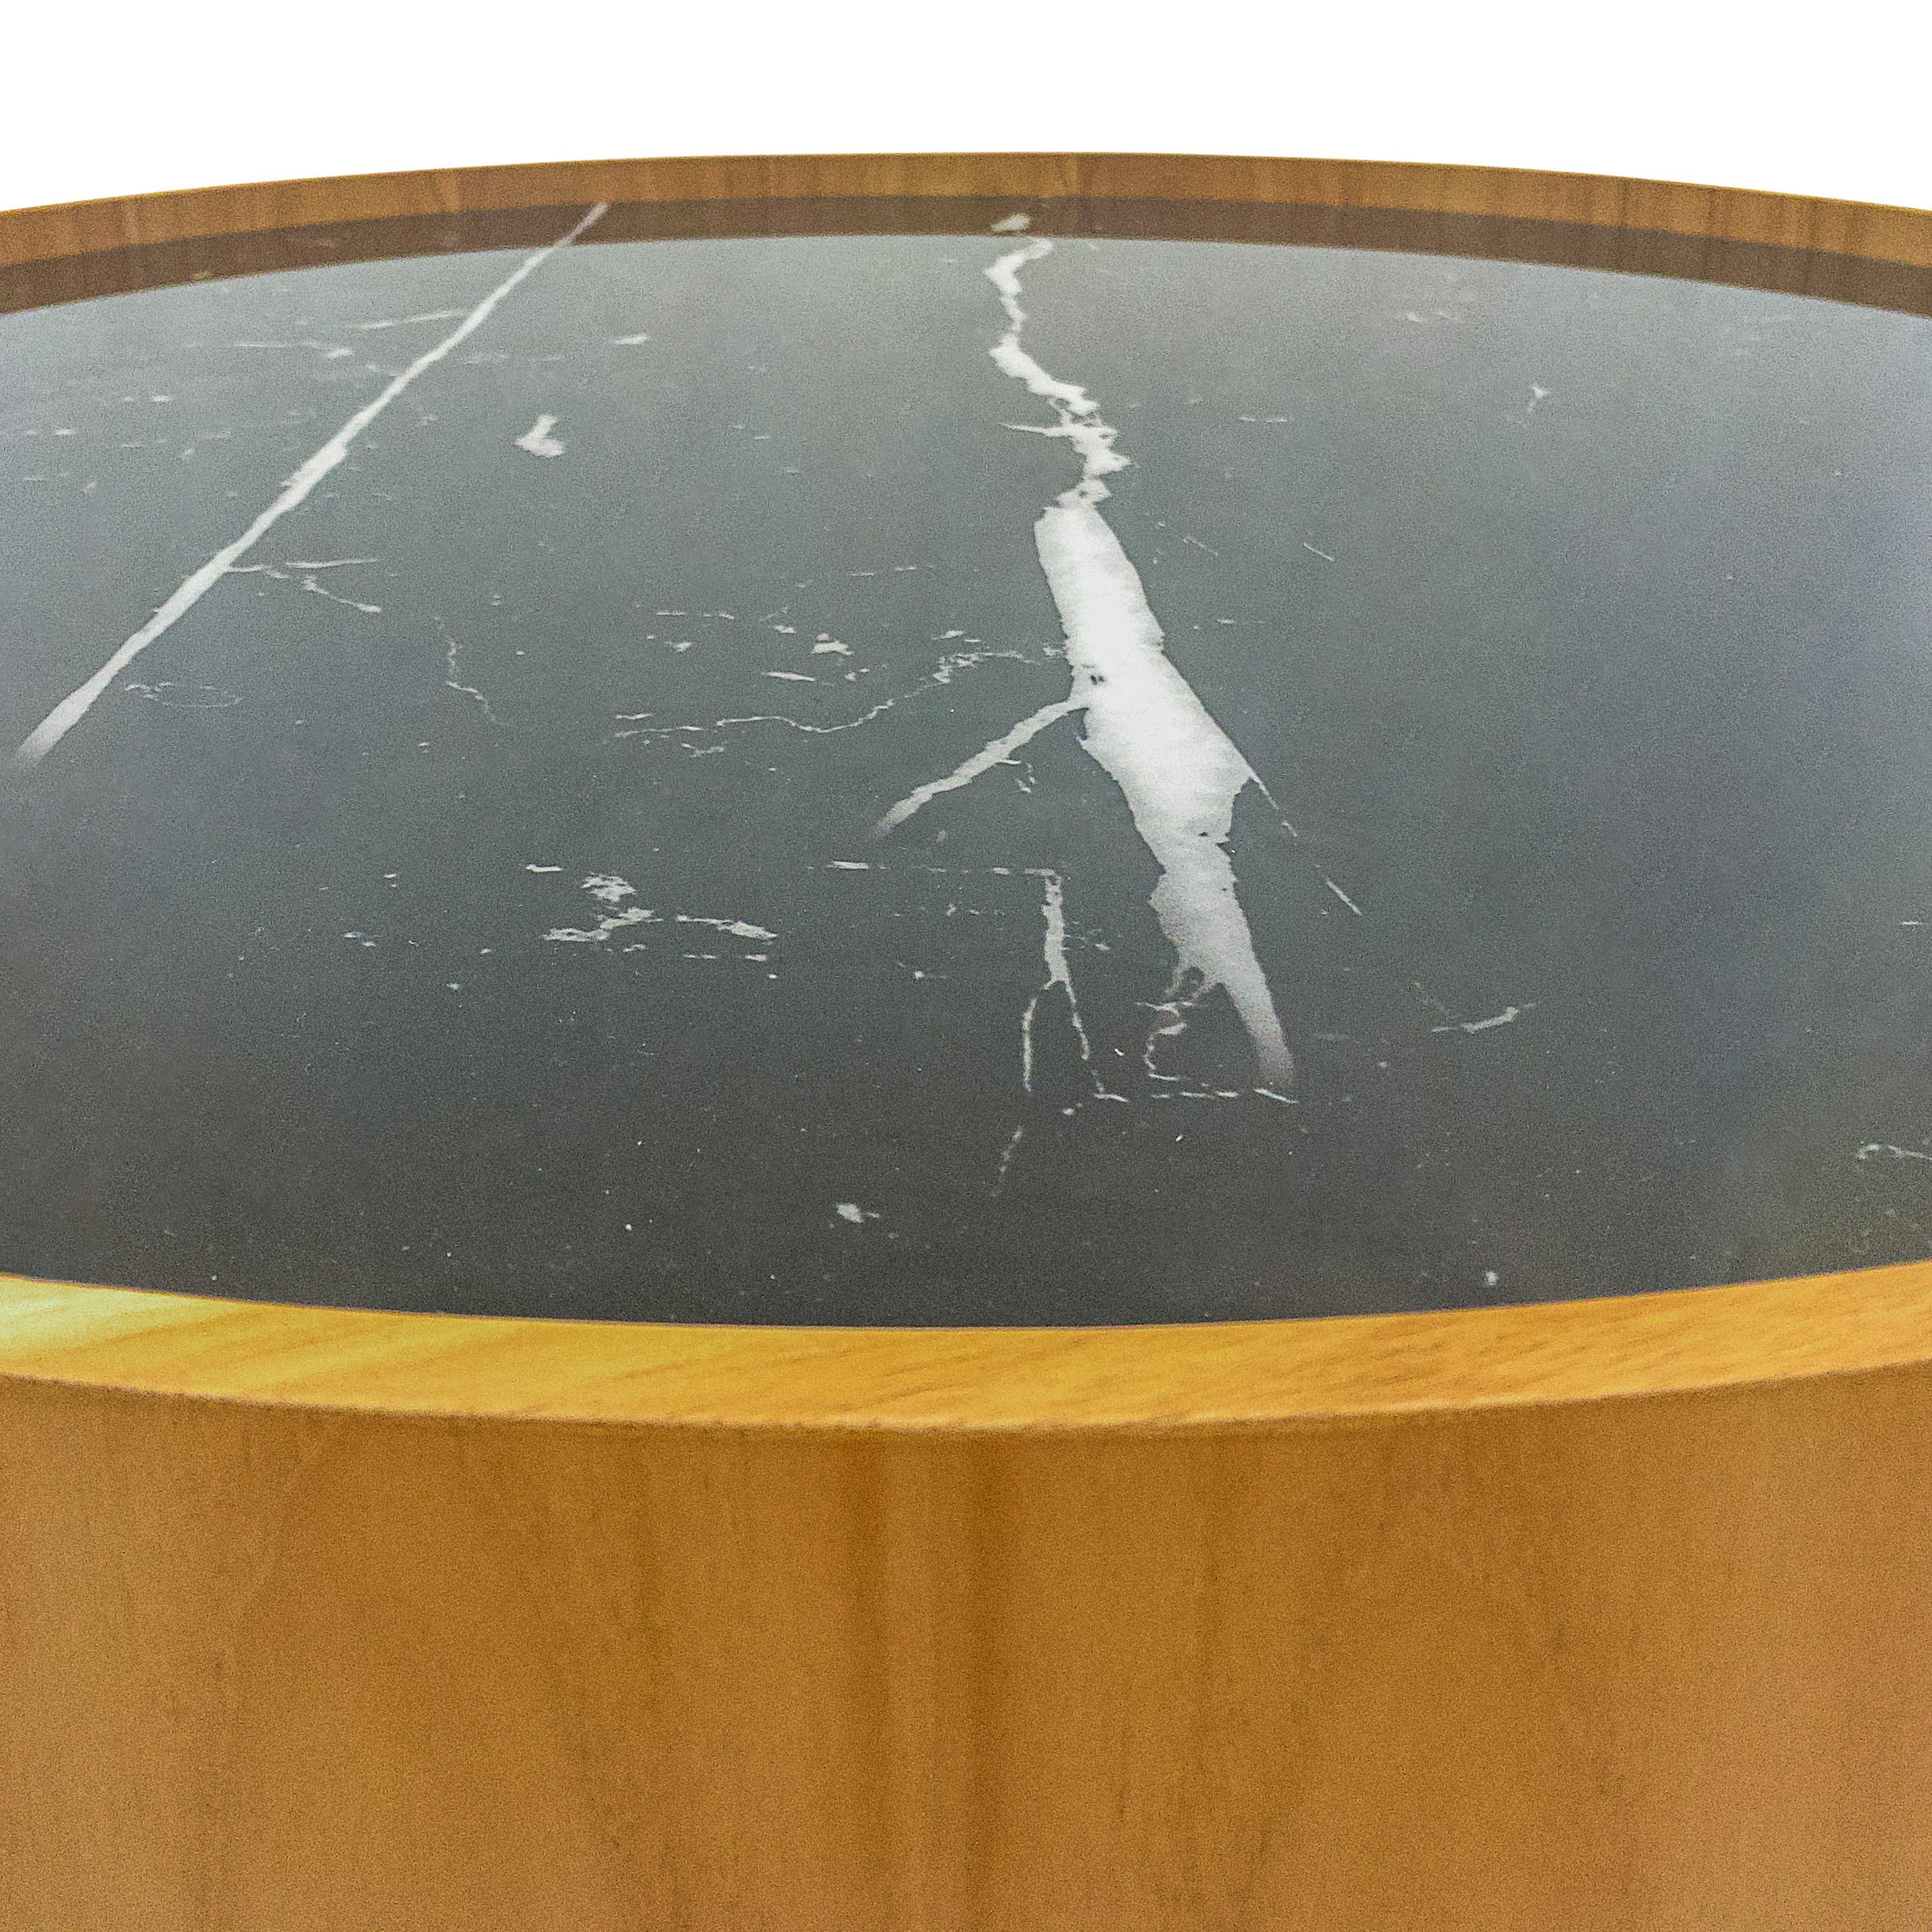 The stunning Regia occasional tables consist of a set of two tables with varying diameters and heights. The tabletop is black nero glass that imitates a beautiful black marble with white veins running through it. Combined with a Teak rim and